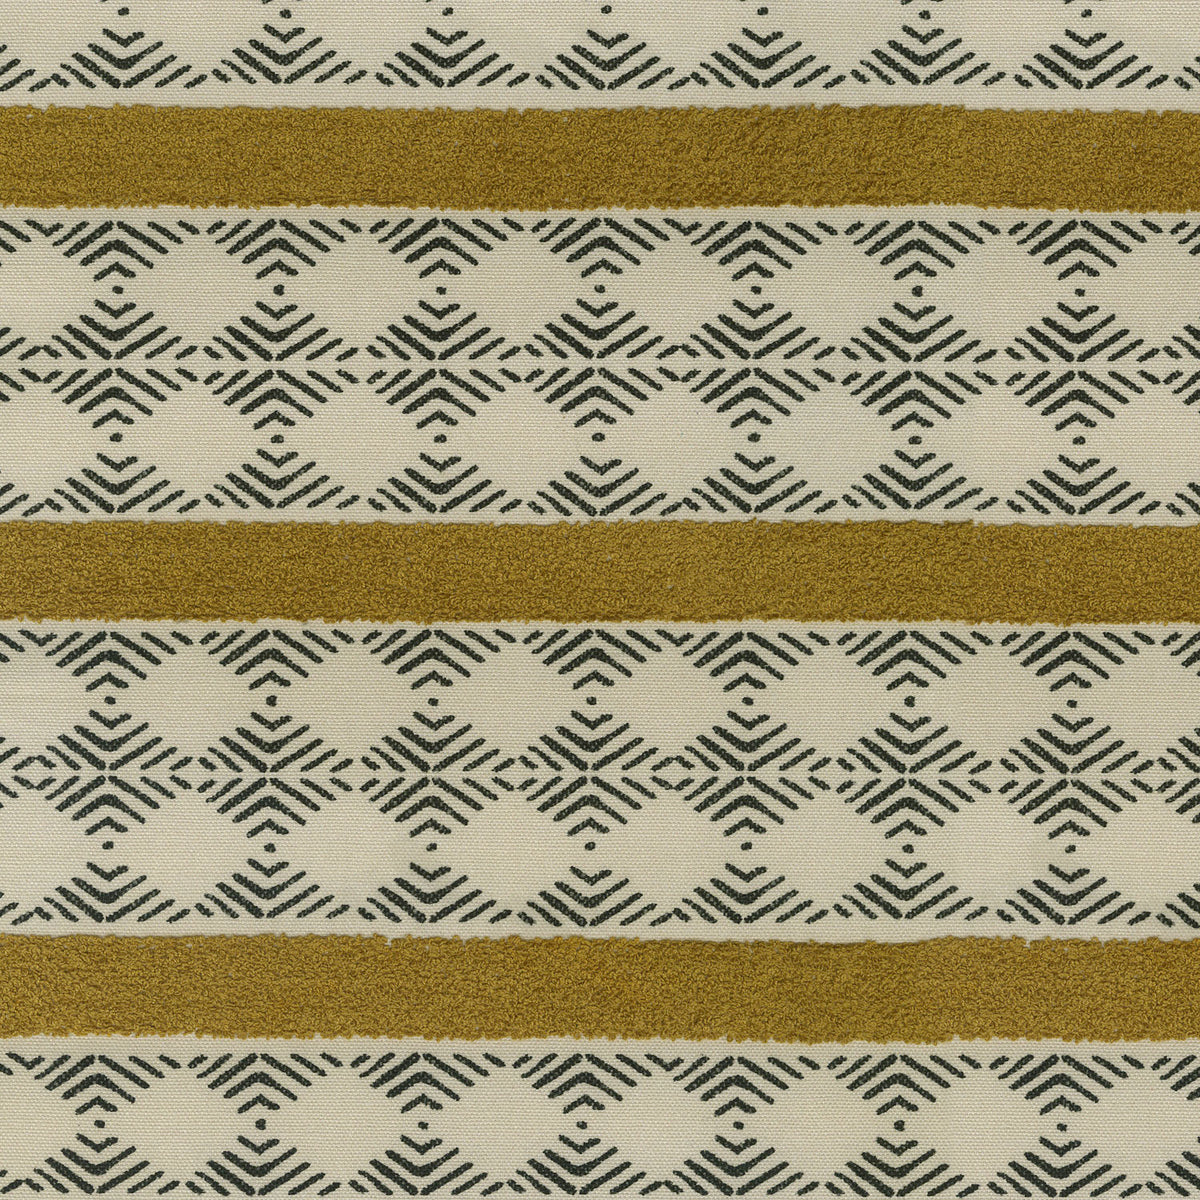 P/K Lifestyles Stitched Patch - Oro 410130 Upholstery Fabric